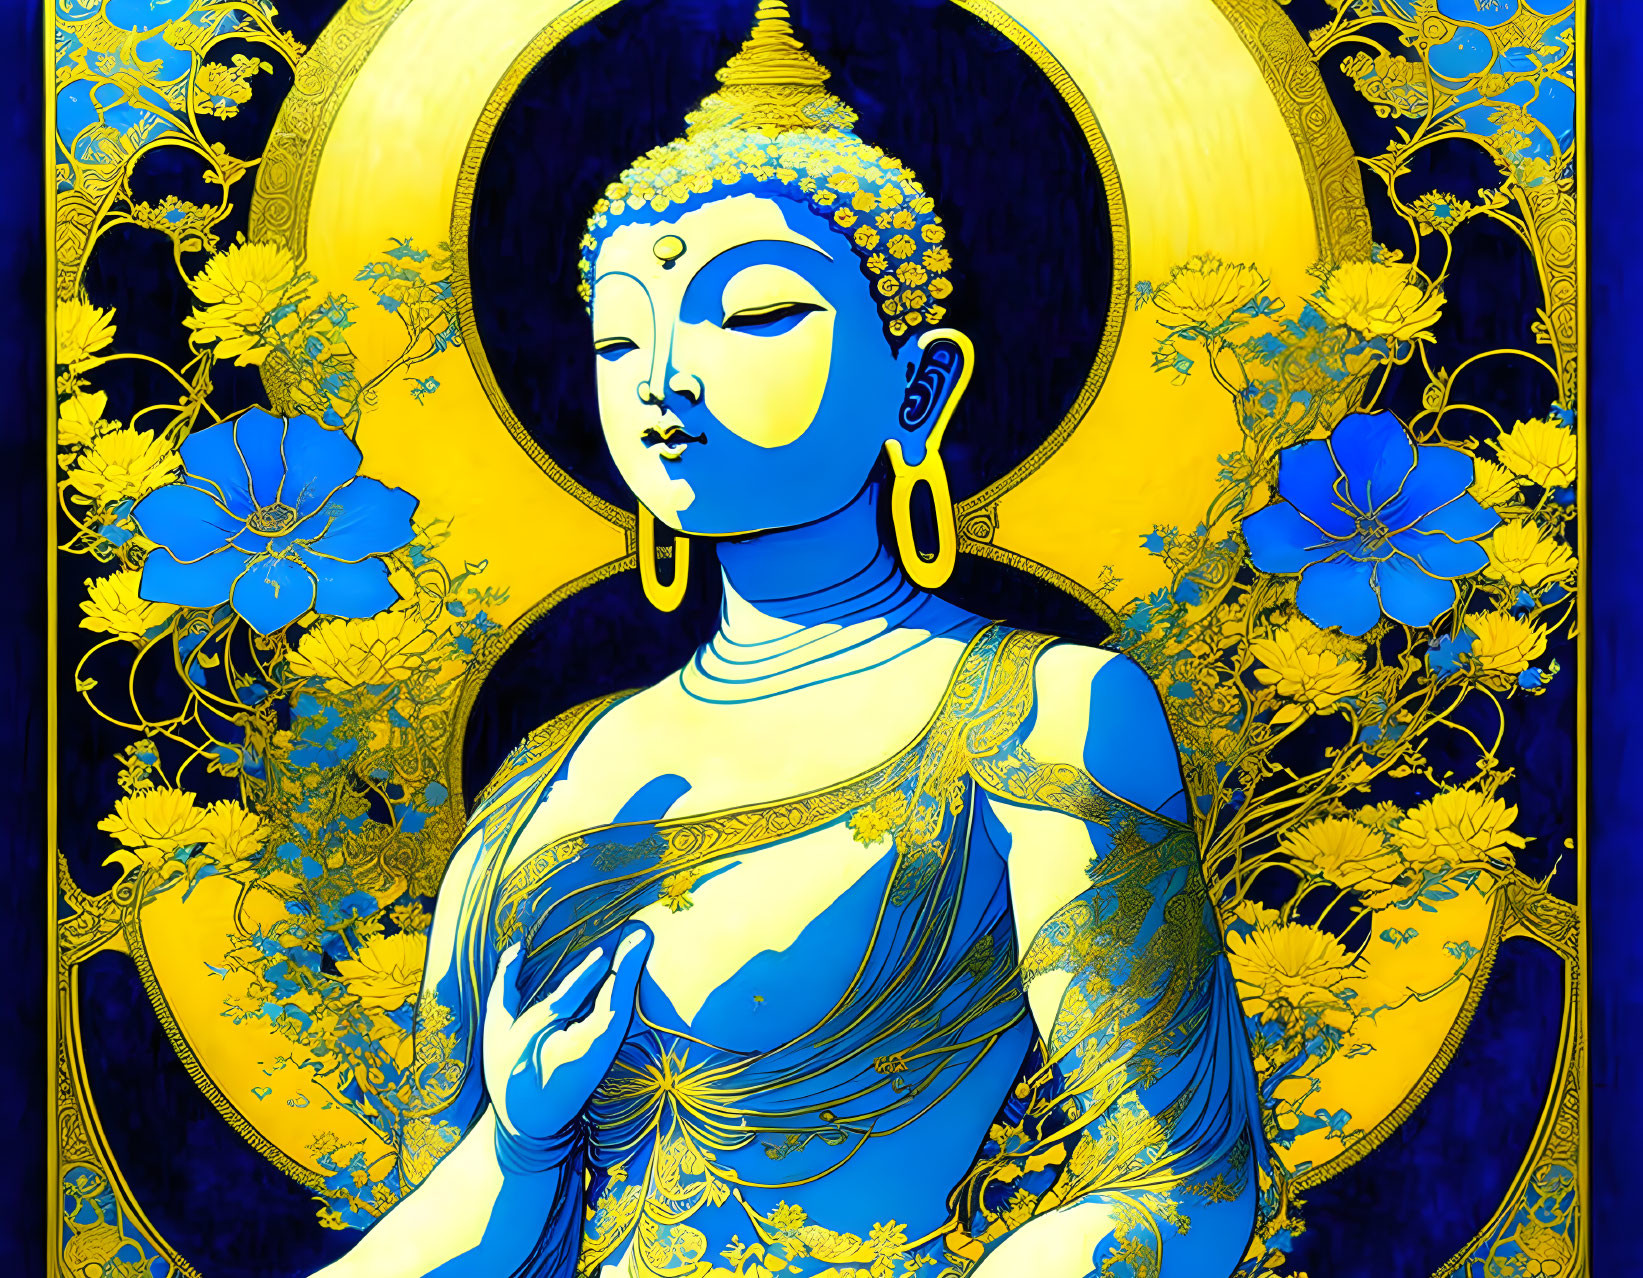 Blue and Gold Buddha Artwork with Radiant Halo and Floral Surroundings